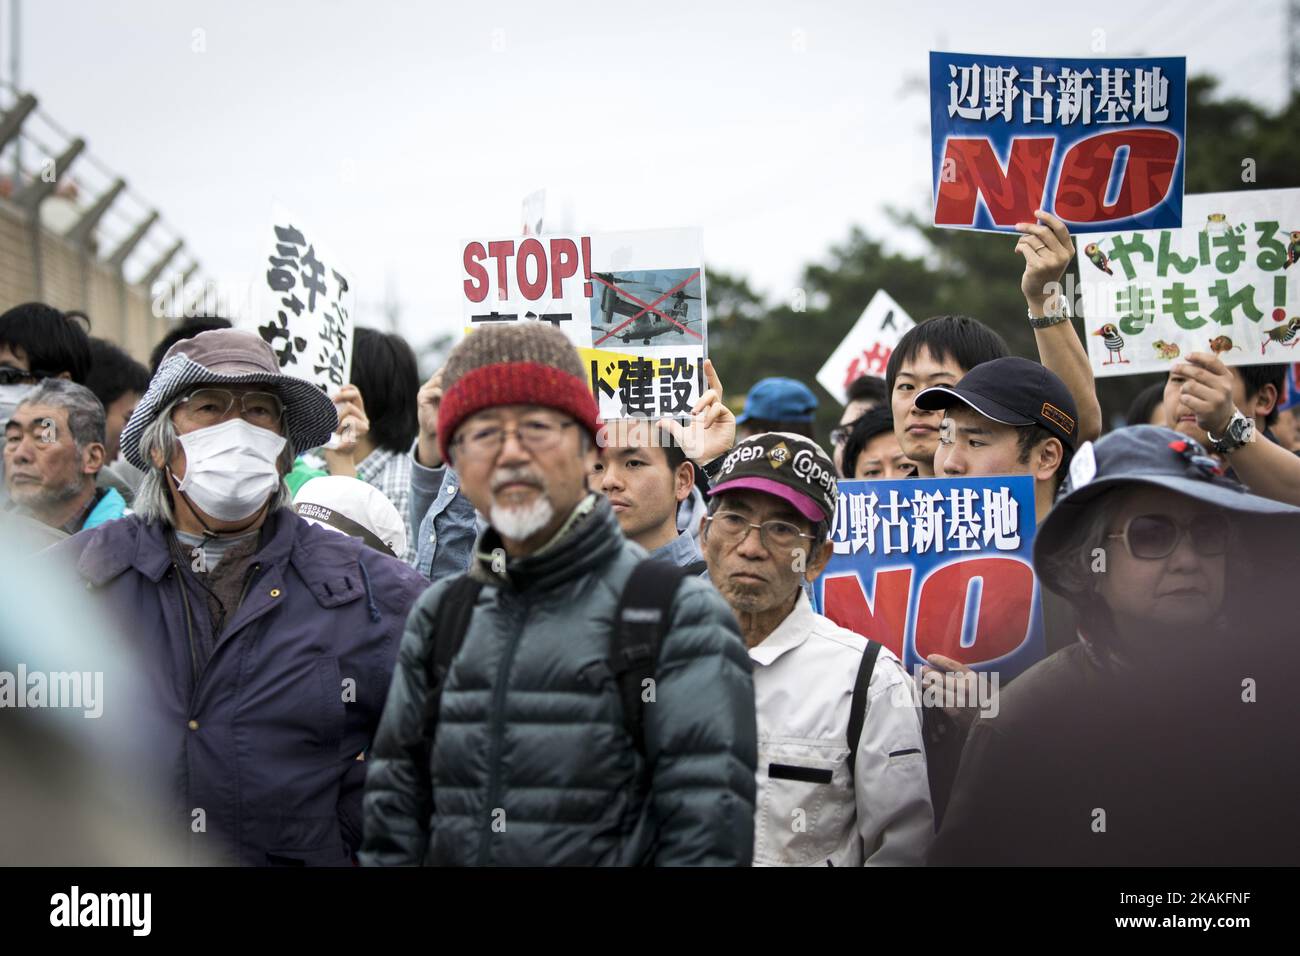 Anti U.S. Base protesters with placards stage a rally outside of the U.S Marine Camp Schwab to protest against the construction of the new U.S Marine Airbase in Nago, Okinawa, Japan on Wednesday, February 1, 2017. Okinawa Gov. Takeshi Onaga arrived in the United States on Tuesday, aiming to convey to President Donald TrumpÂ’s administration local opposition to a plan to relocate a U.S. airbase within the southern island prefecture. (Photo by Richard Atrero de Guzman/NurPhoto) *** Please Use Credit from Credit Field *** Stock Photo